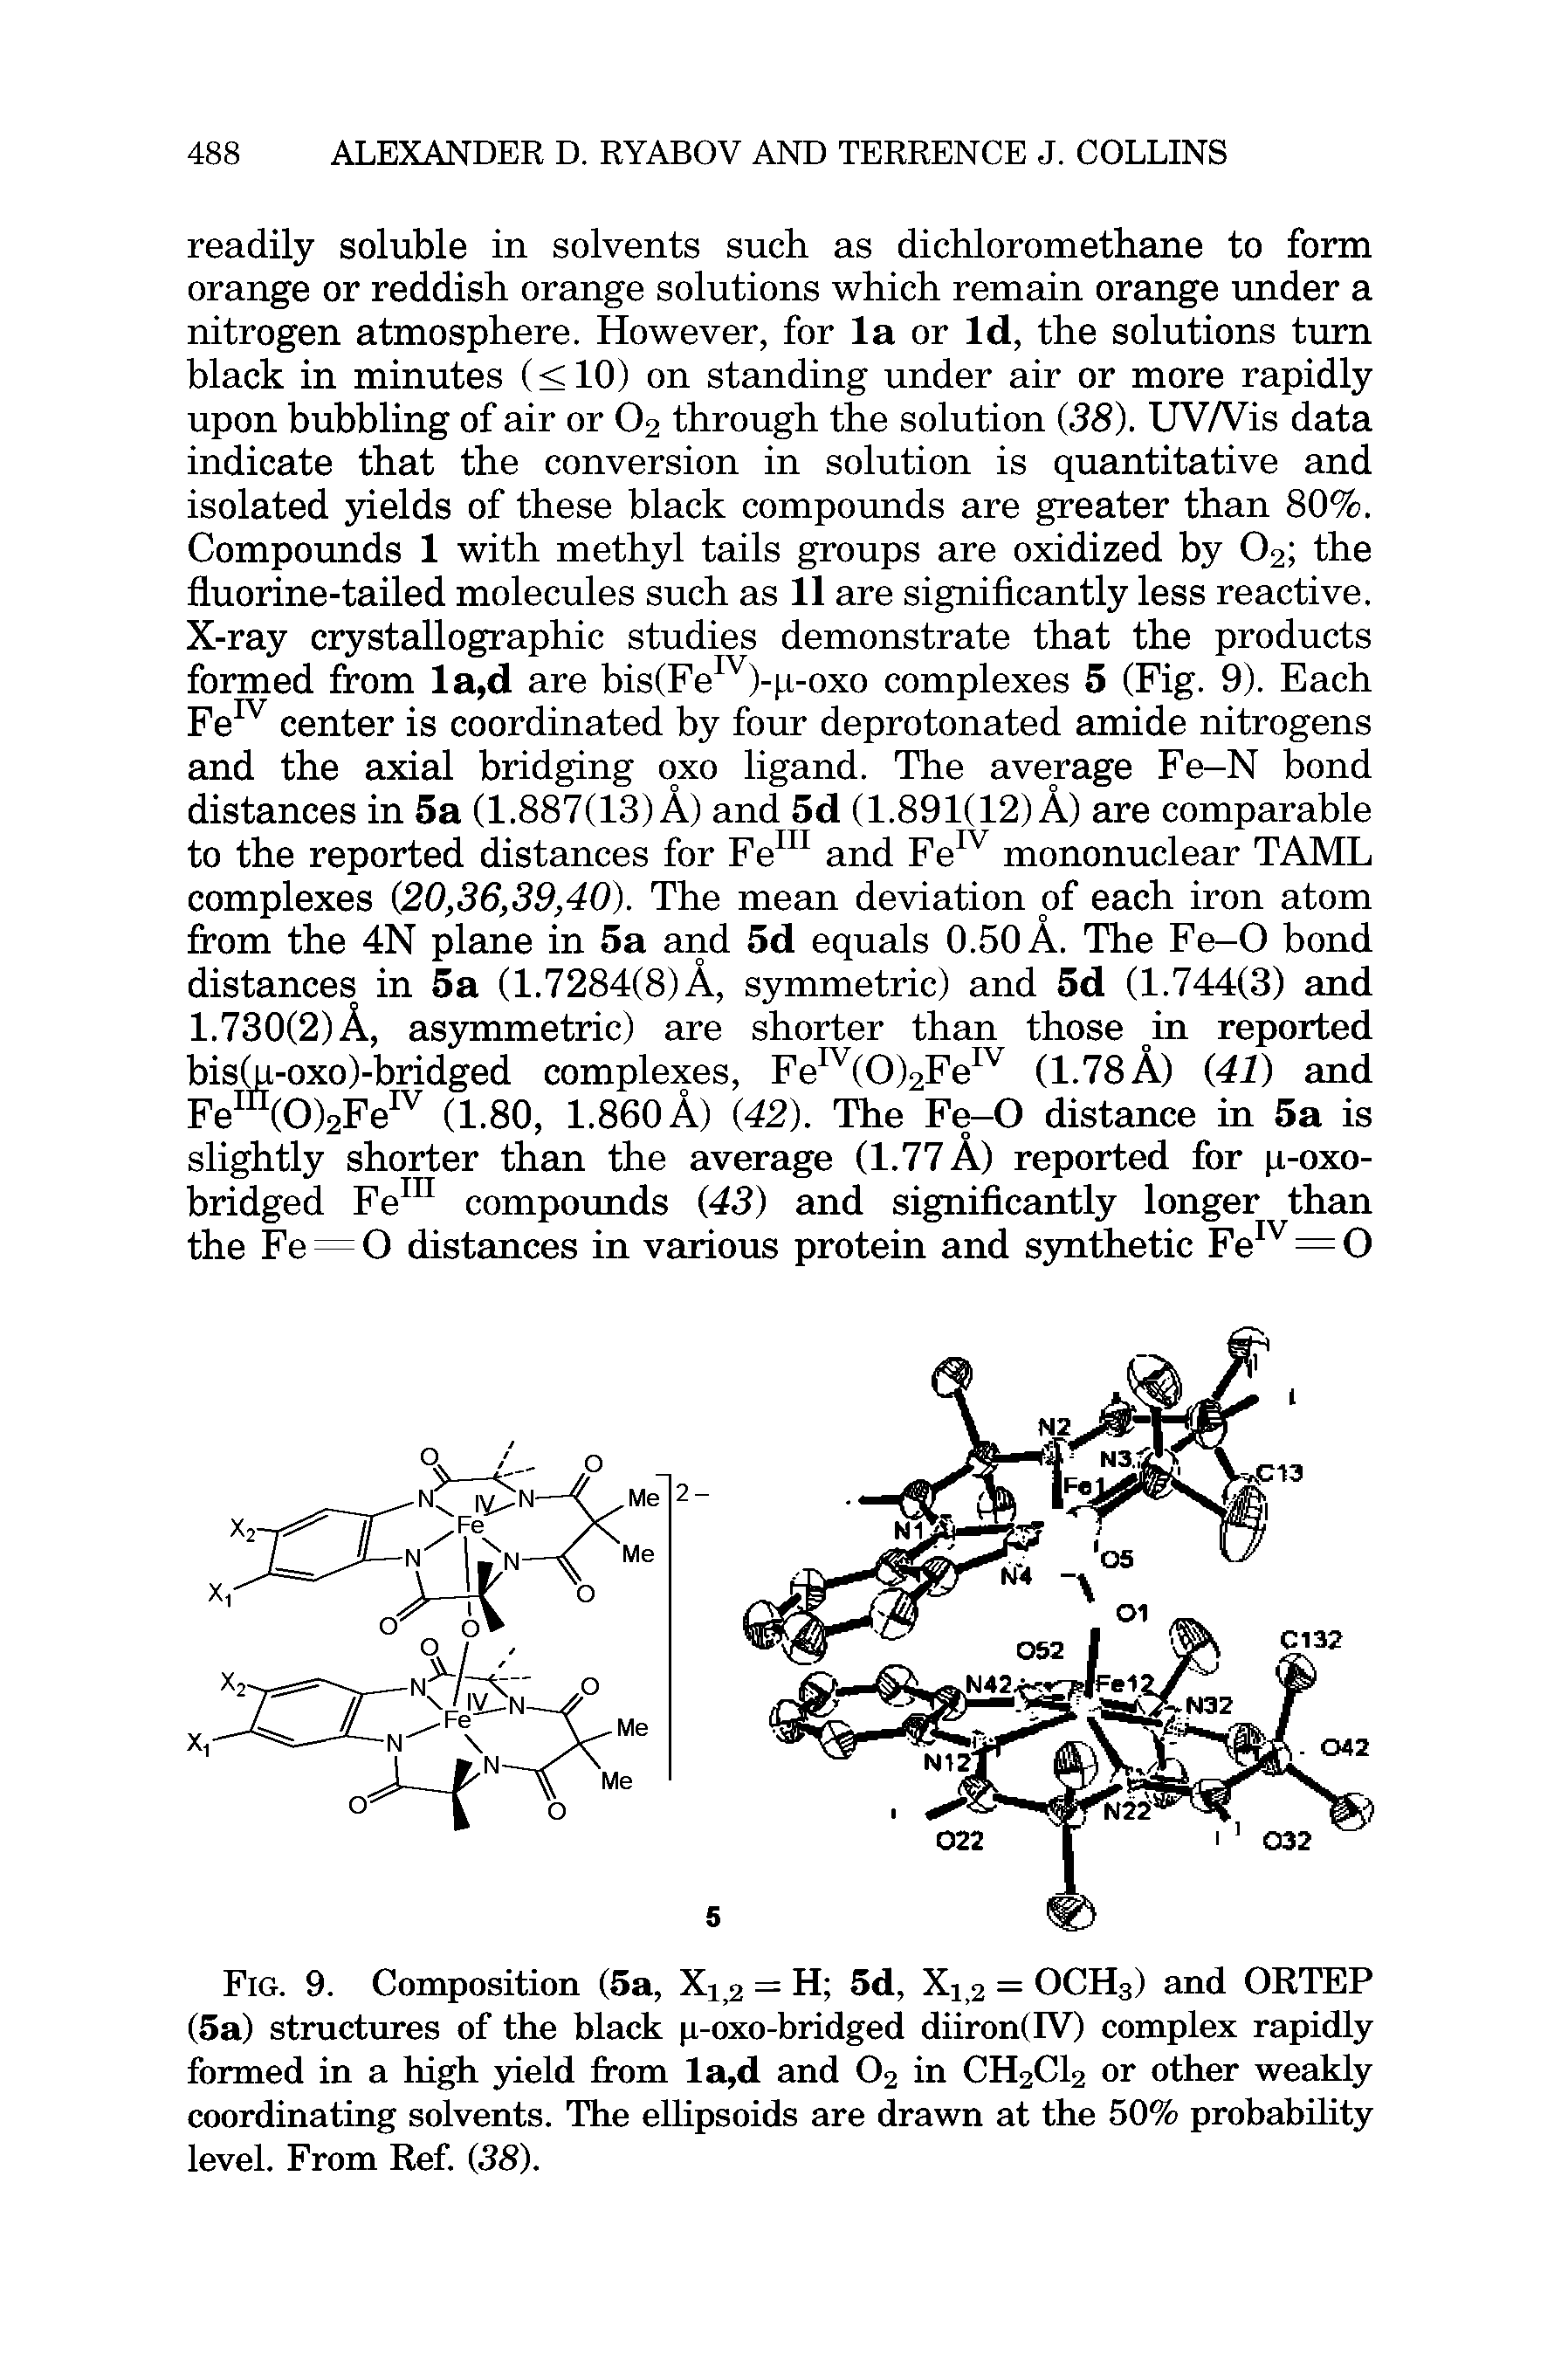 Fig. 9. Composition (5a, X12 = H 5d, X12 = OCH3) and ORTEP (5a) structures of the black p-oxo-bridged diiron(IV) complex rapidly formed in a high yield from la,d and 02 in CH2C12 or other weakly coordinating solvents. The ellipsoids are drawn at the 50% probability level. From Ref. (38).